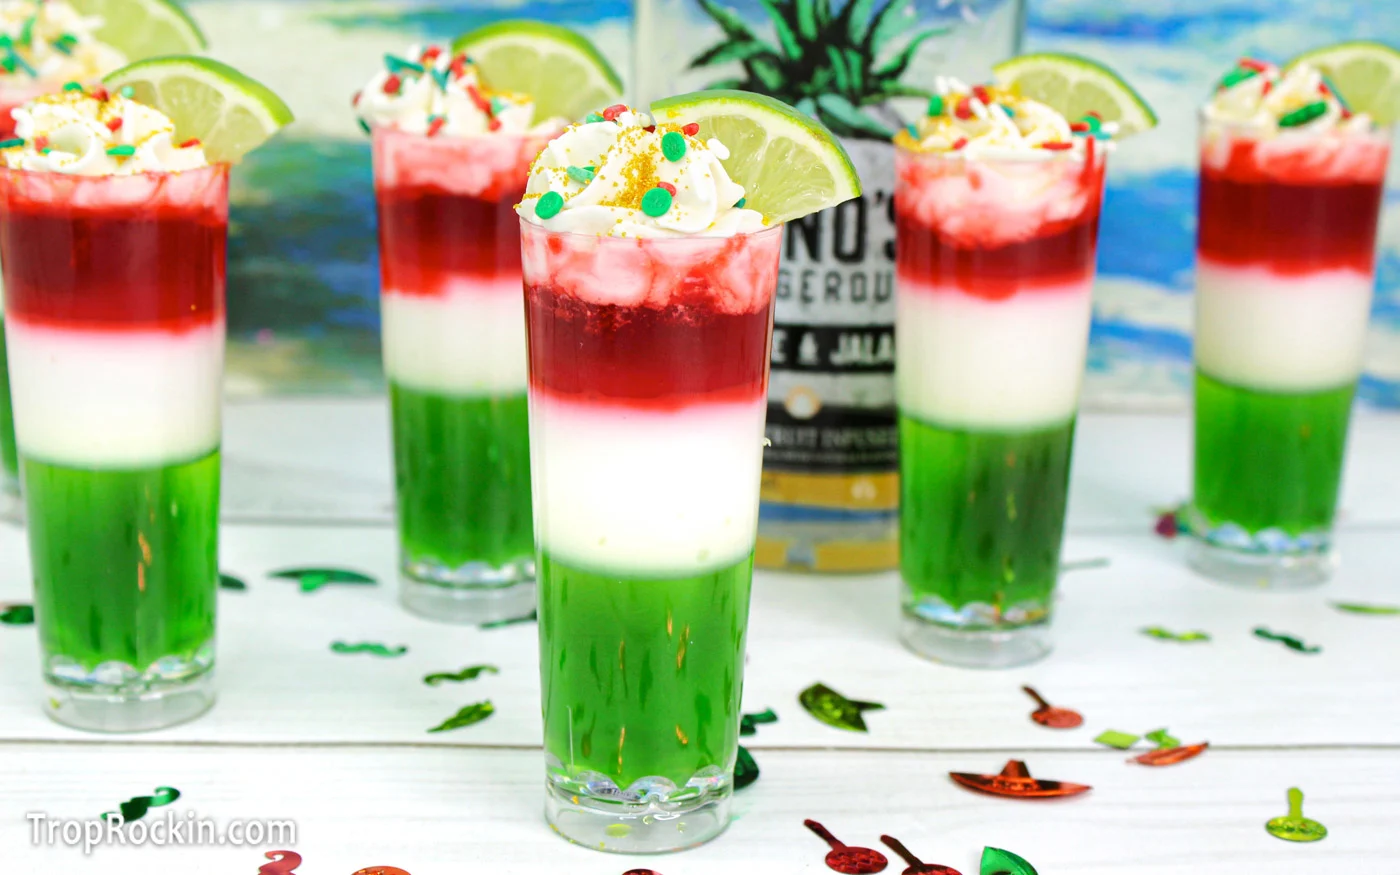 Five Mexican Flag Jello Shots with three layers: green, white and red. Topped with whipped cream and sprinkles and garnished with a lime wedge on a white wood tabletop with a tropical ocean background.